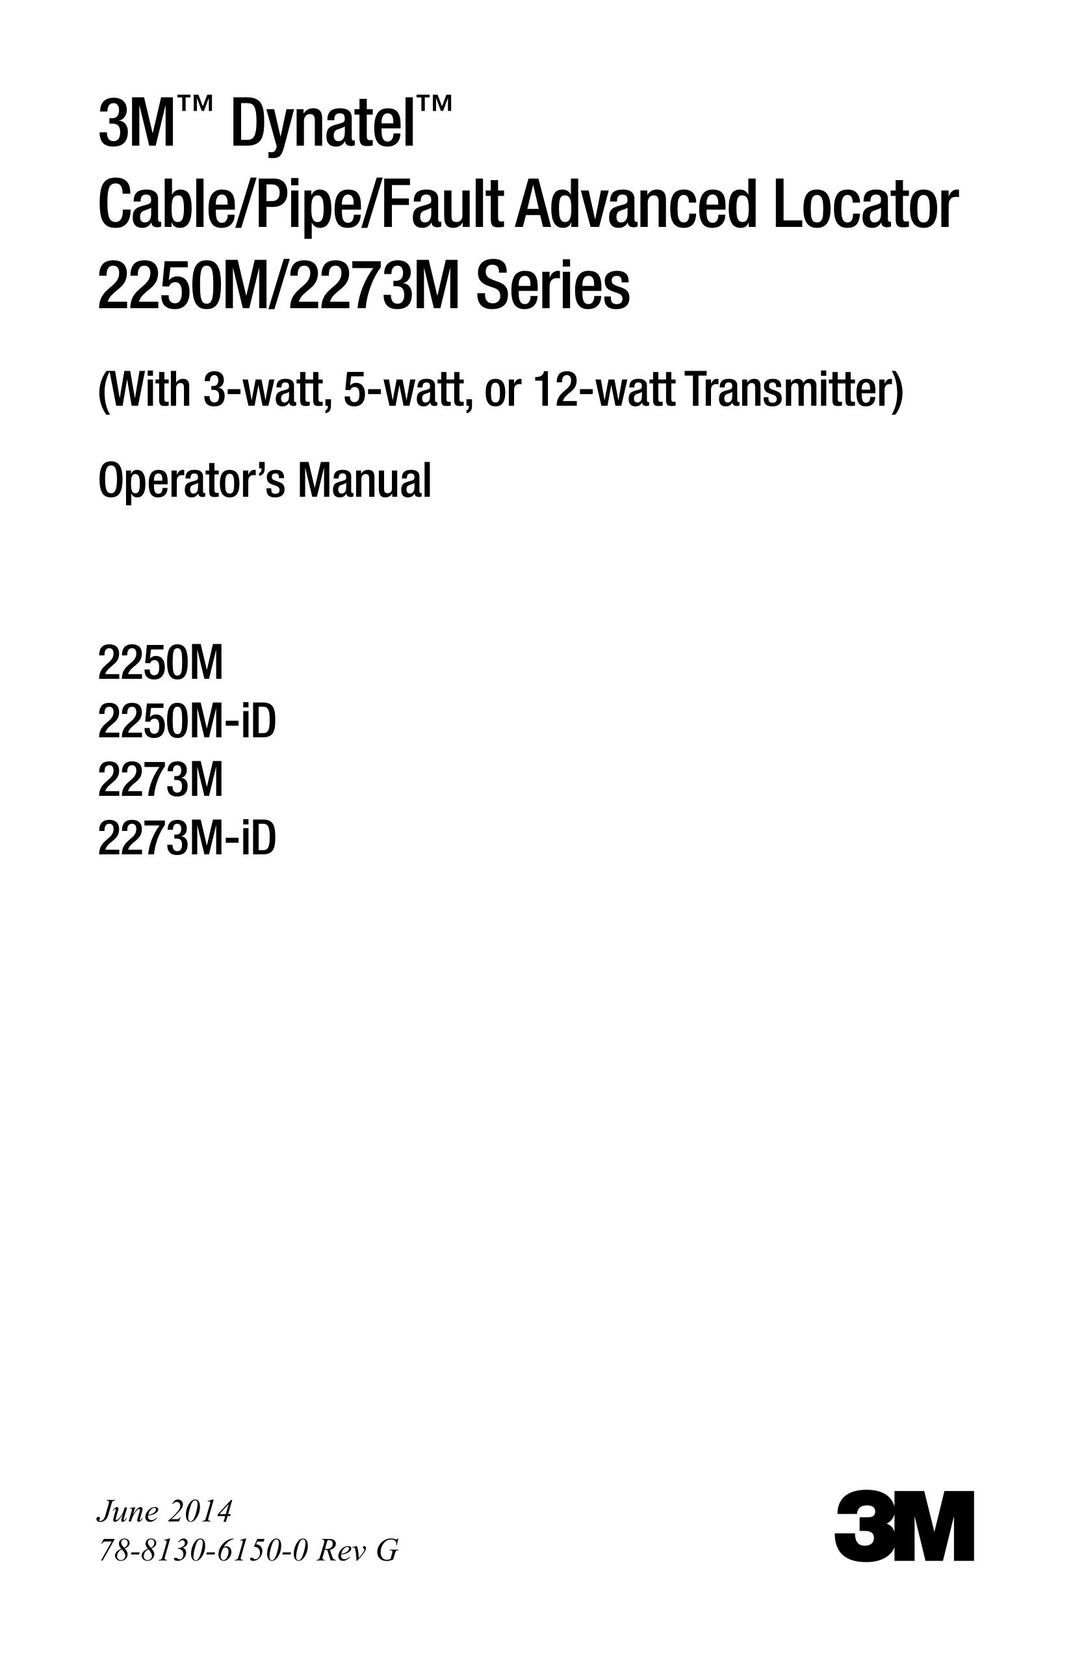 3M 2273M-iD Cable Box User Manual